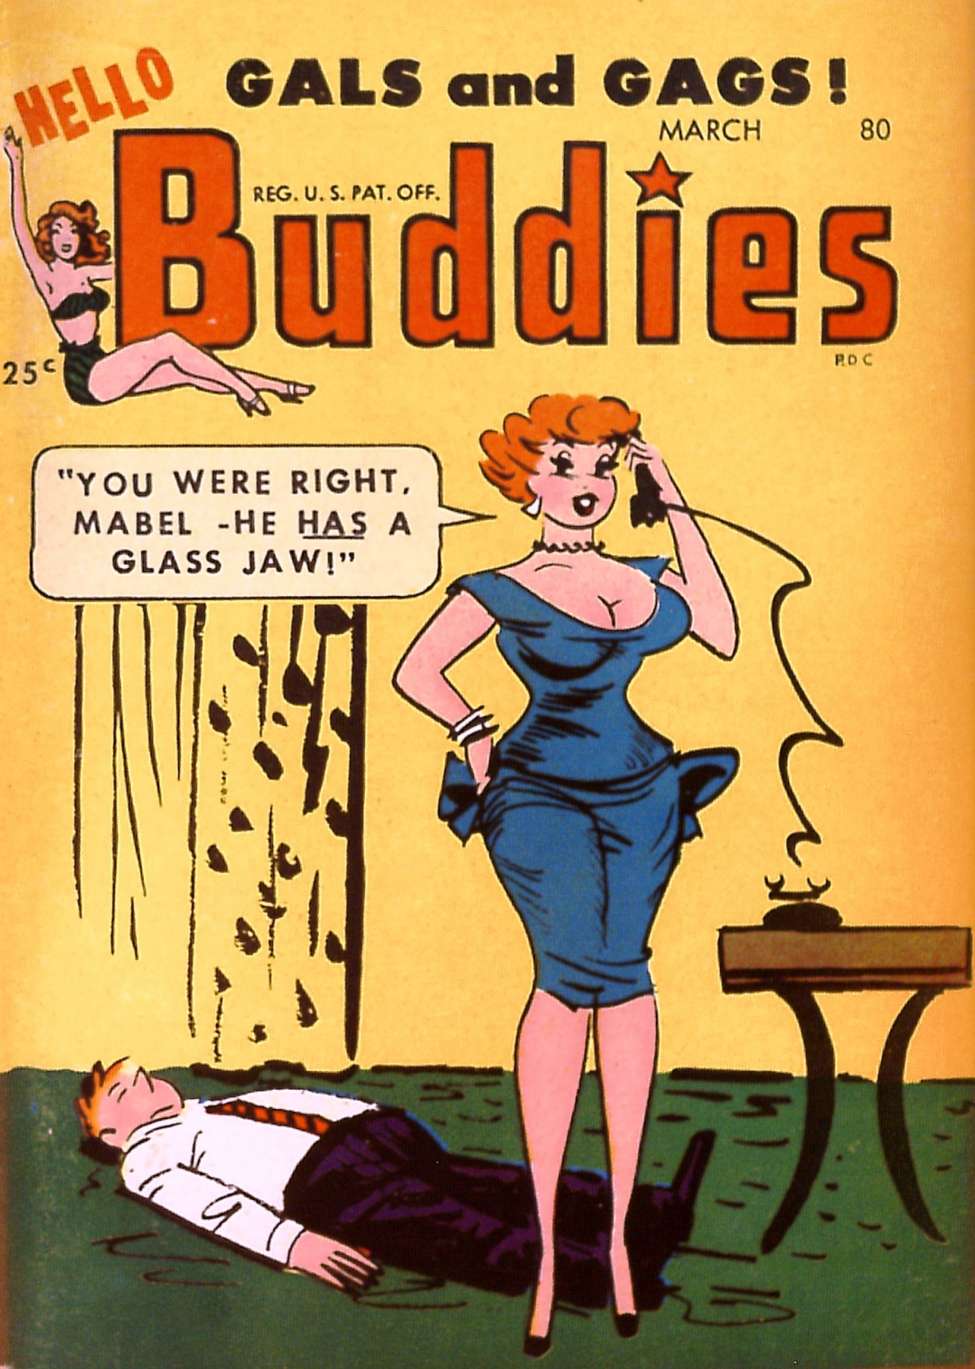 Book Cover For Hello Buddies 80